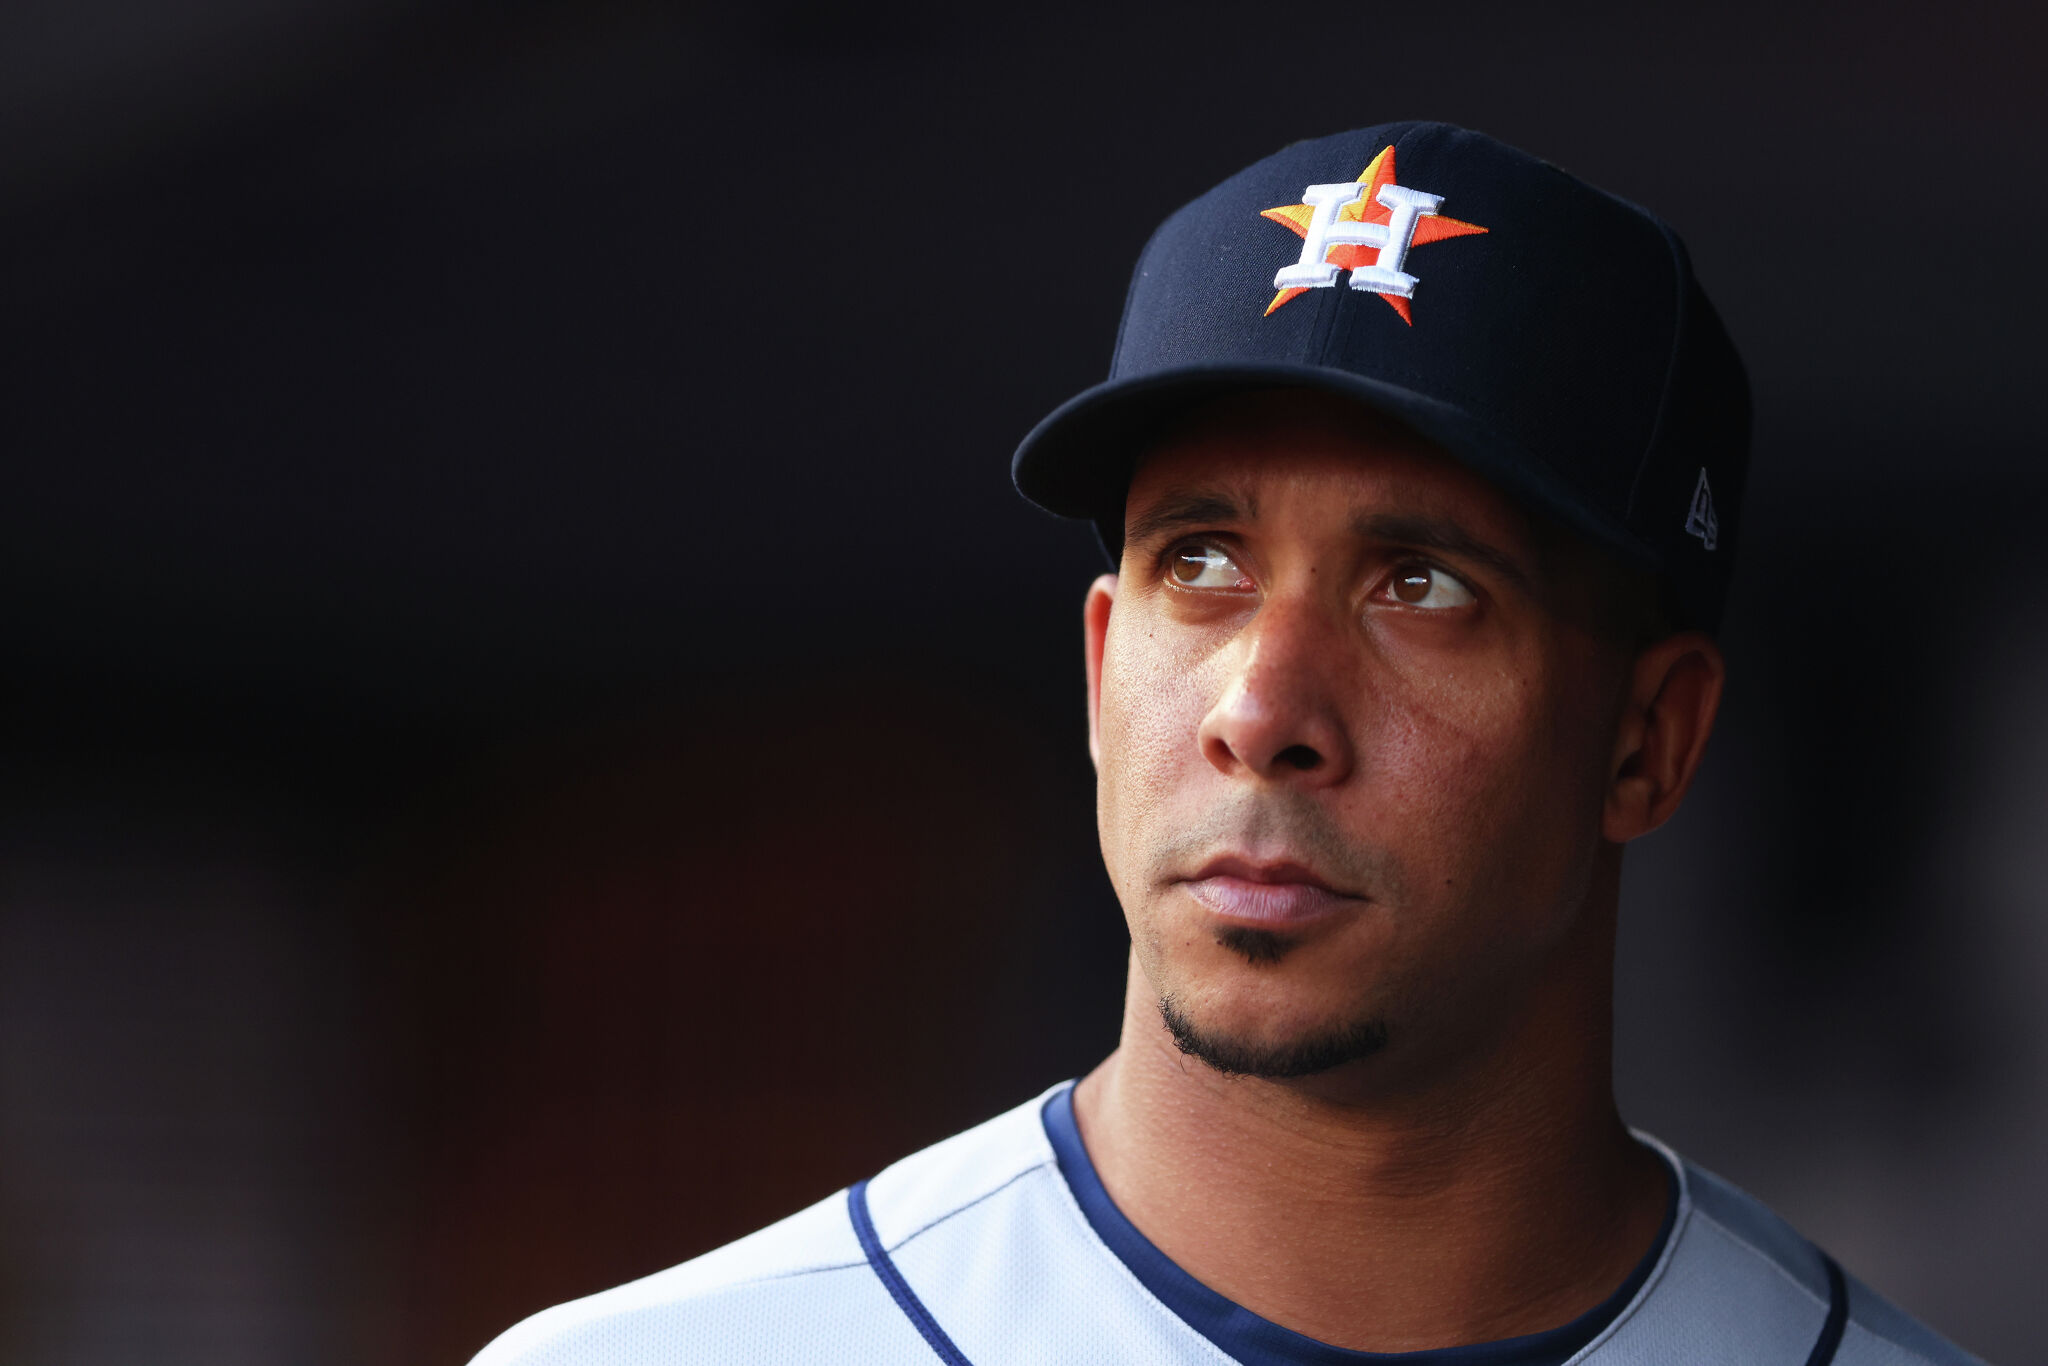 Astros place OF Michael Brantley on IL with shoulder issue